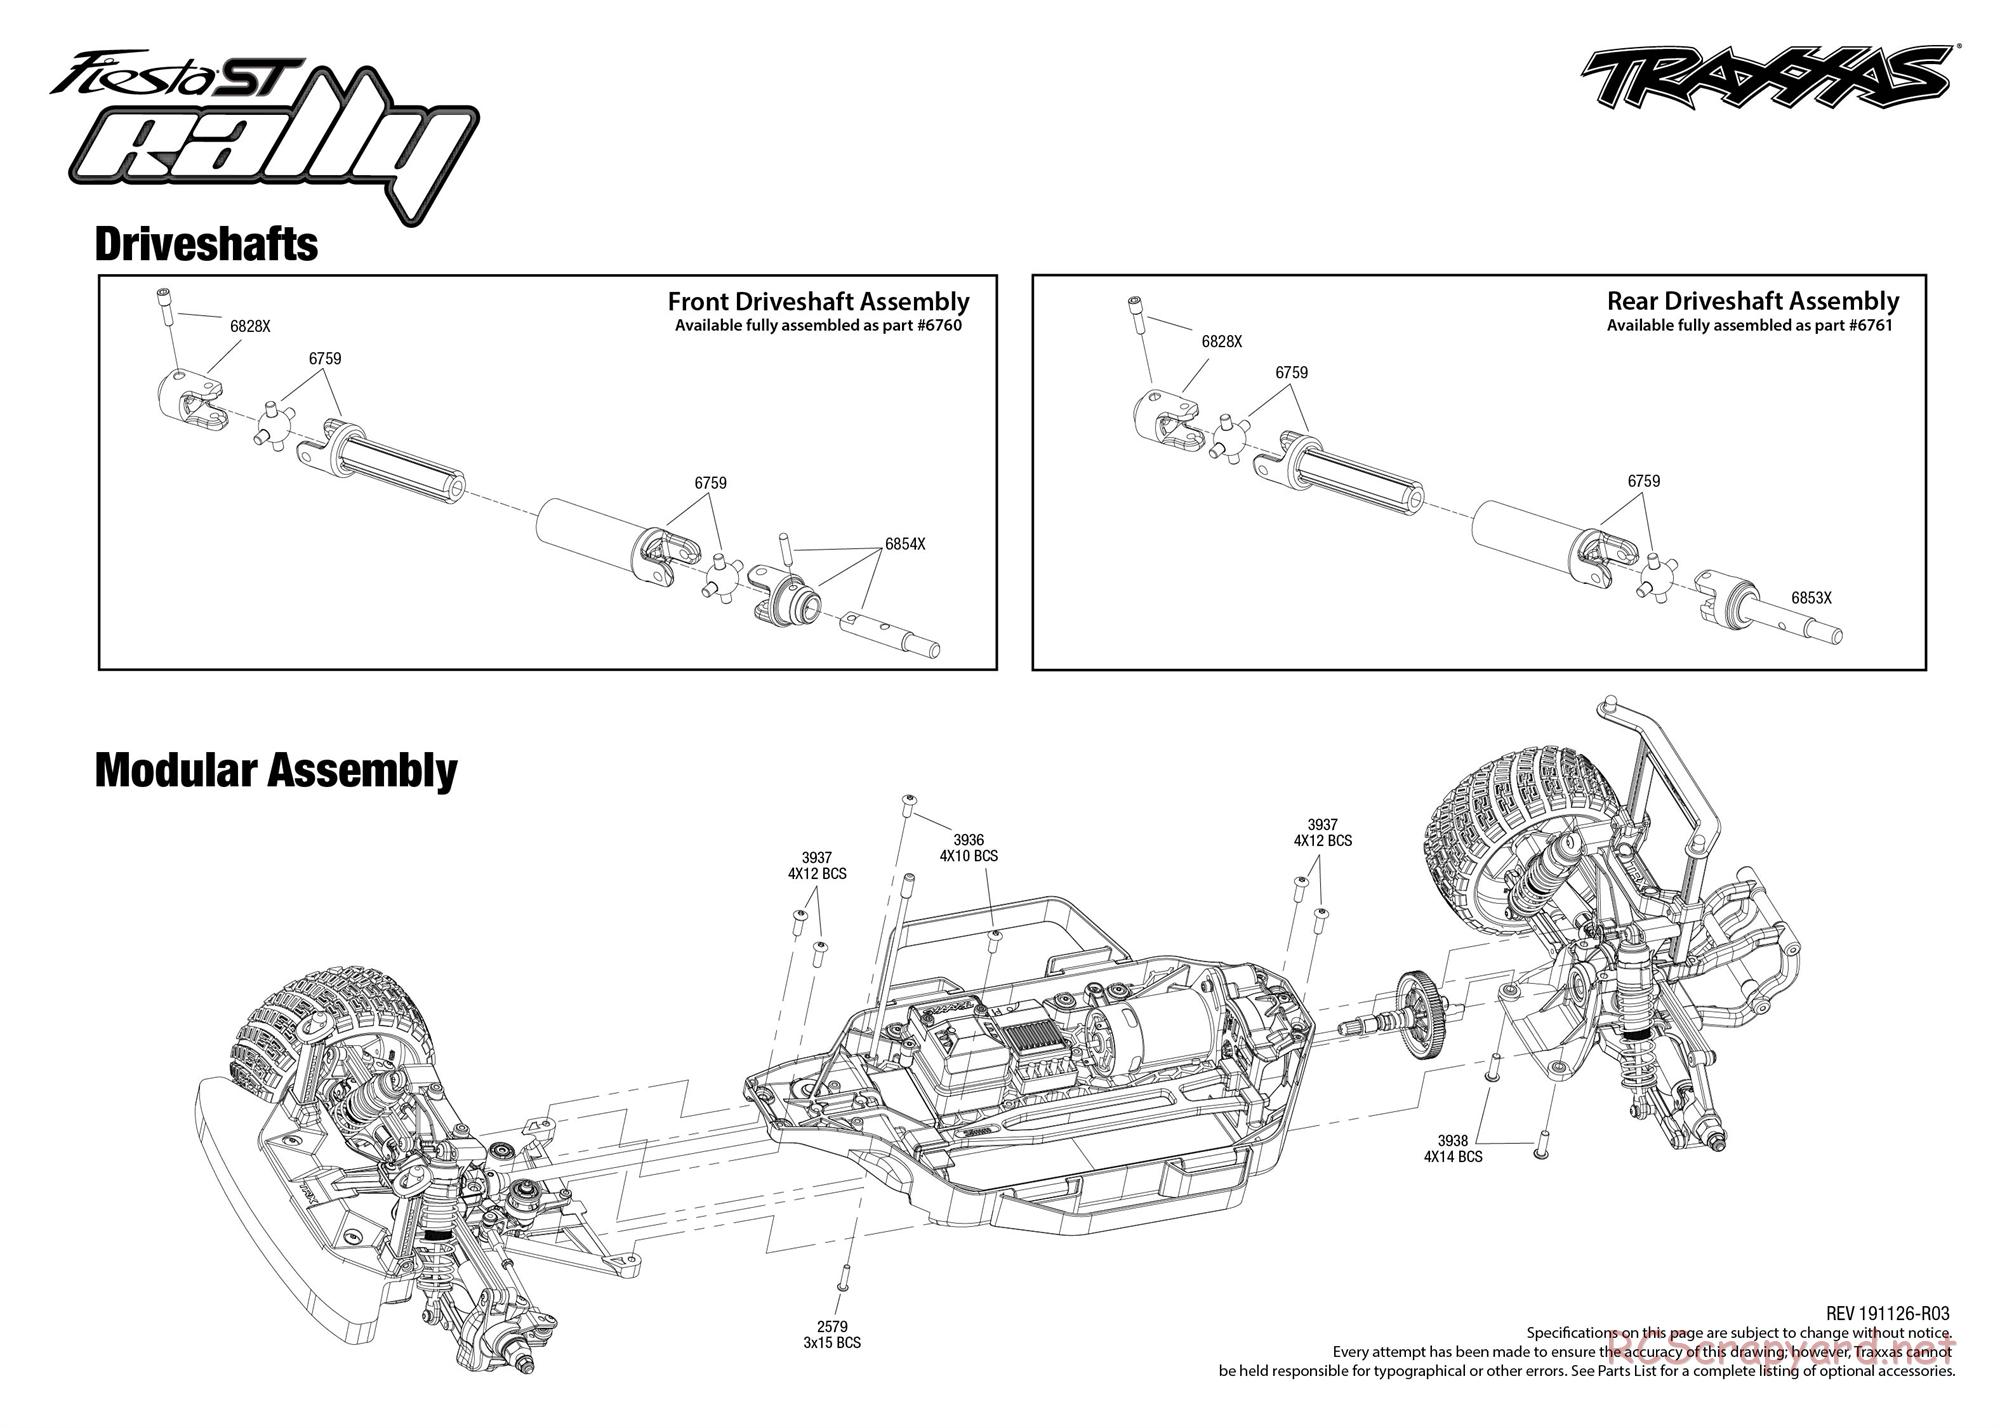 Traxxas - VR46 Ford Fiesta ST Rally SE (2018) - Exploded Views - Page 2